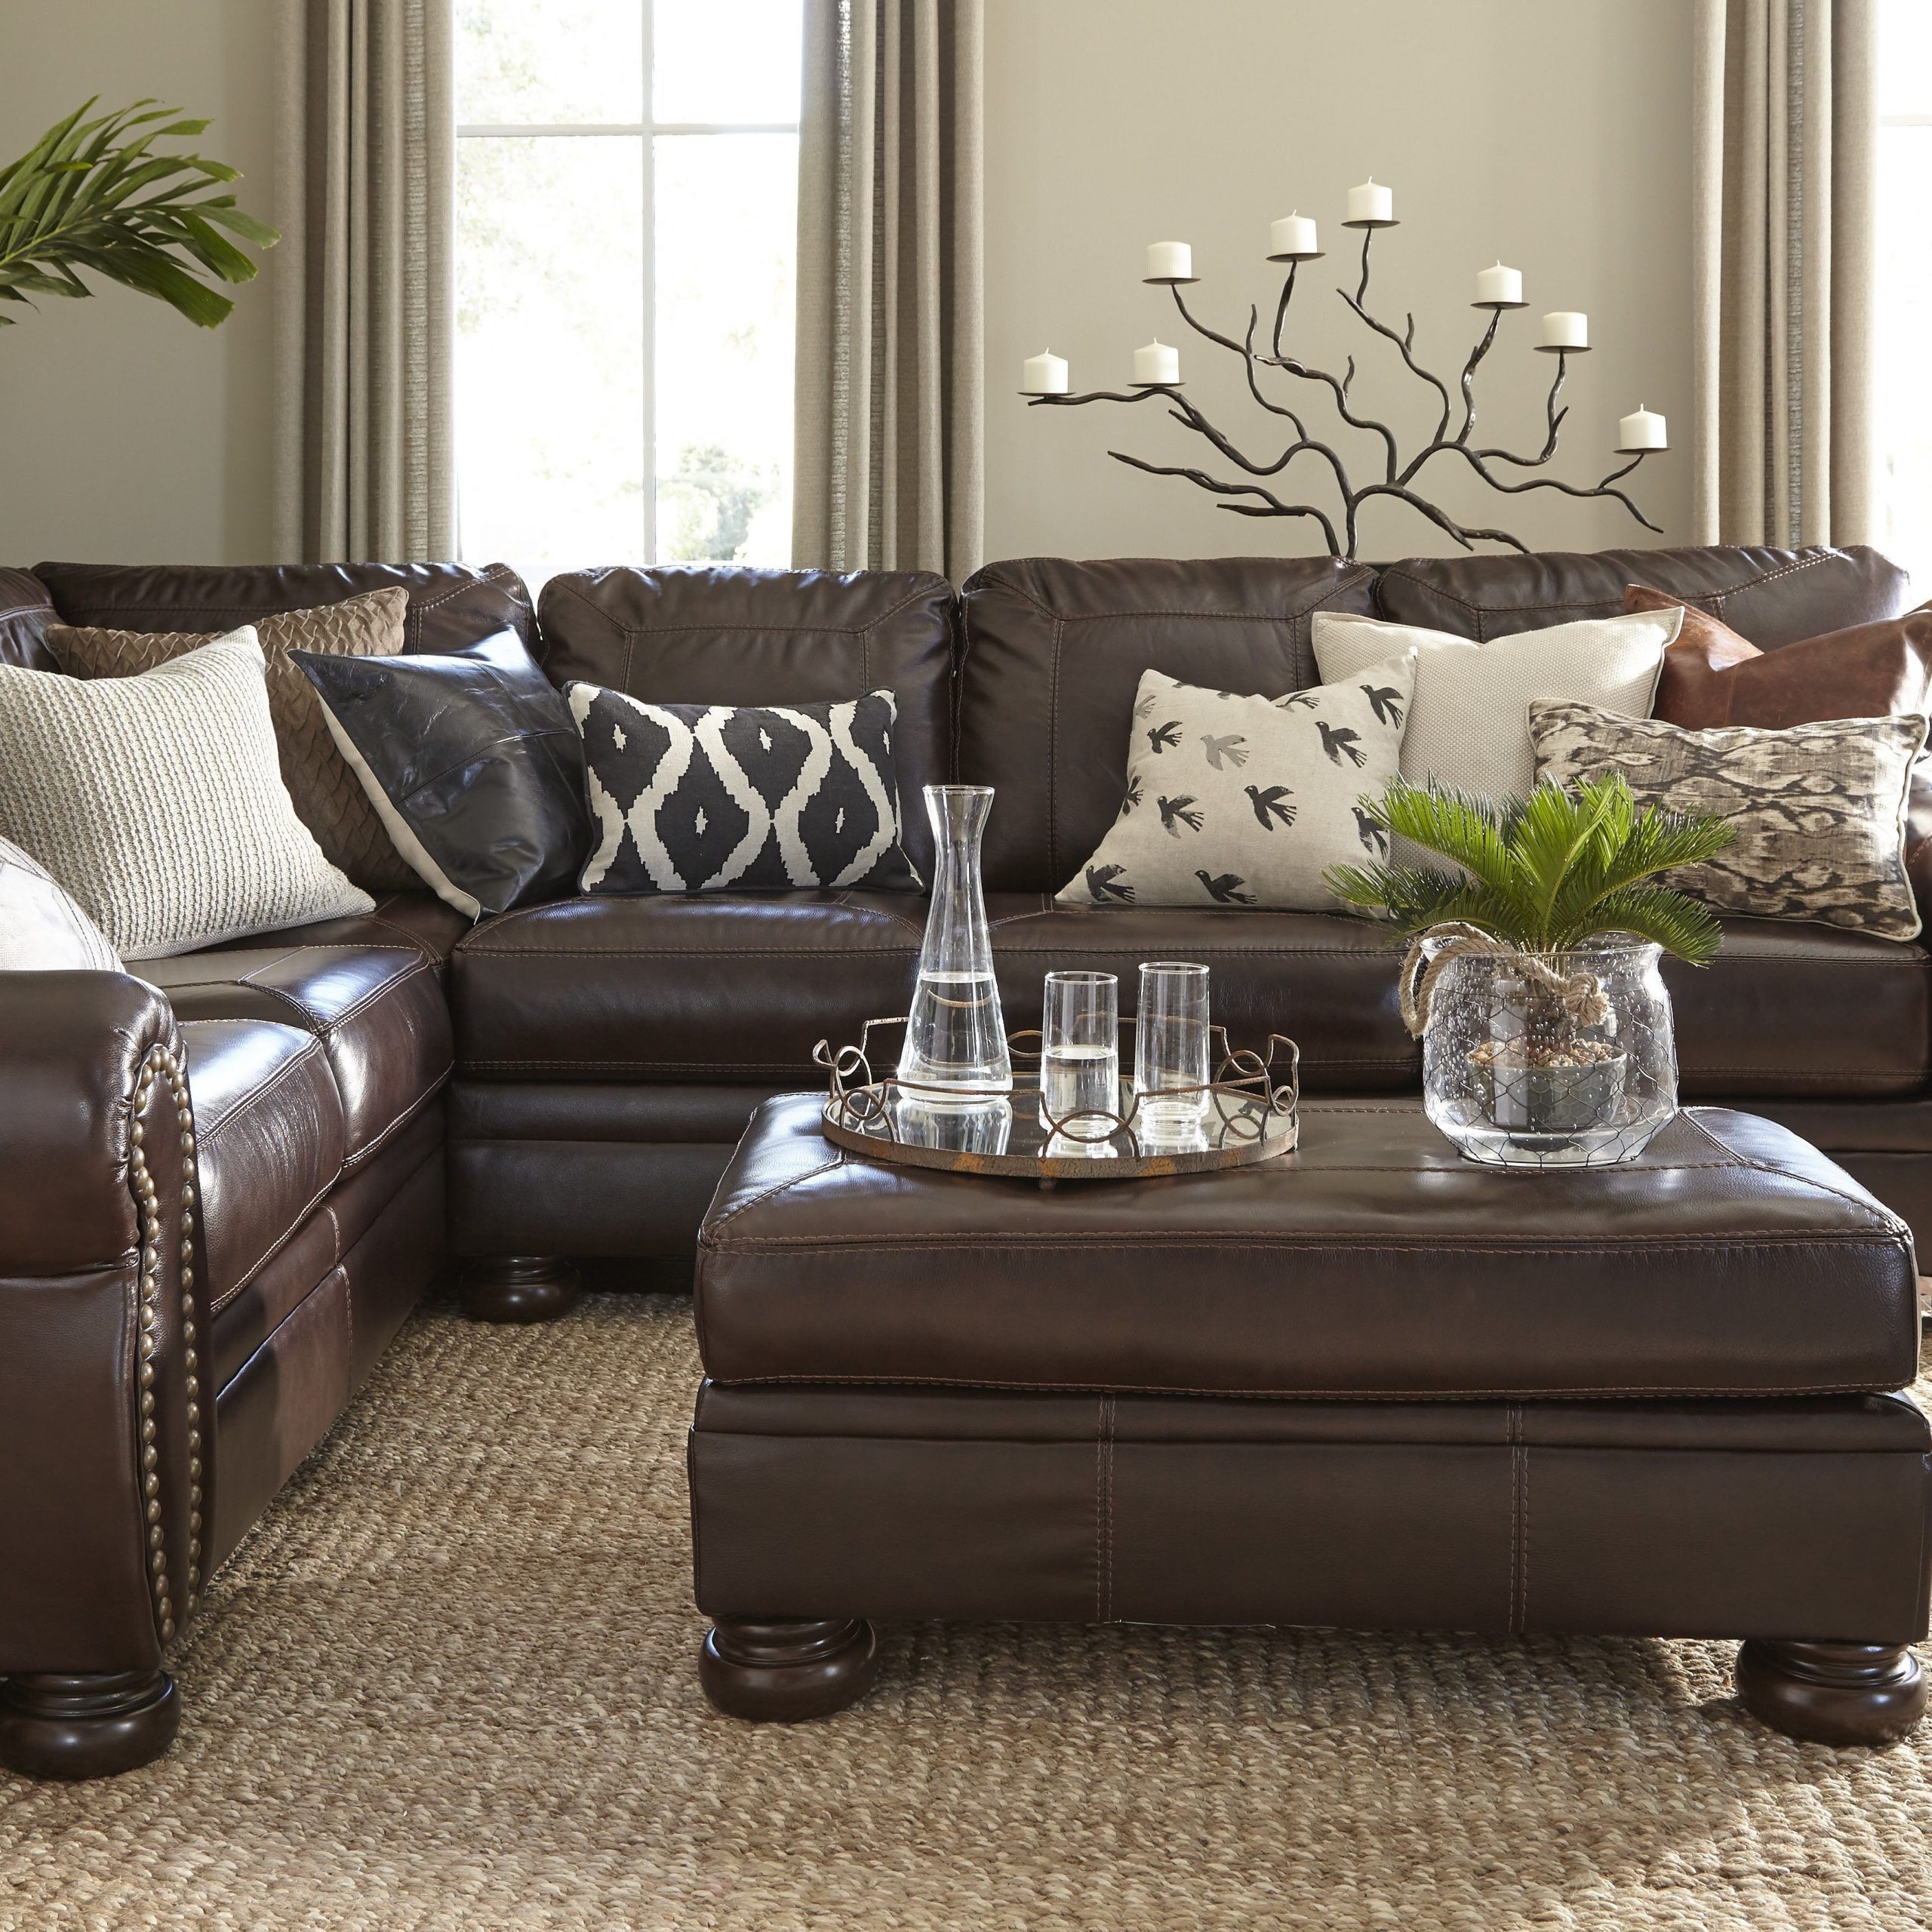 Chocolate Brown Leather Sofas – Sofa Living Room Ideas Regarding Faux Leather Sofas In Chocolate Brown (View 14 of 20)